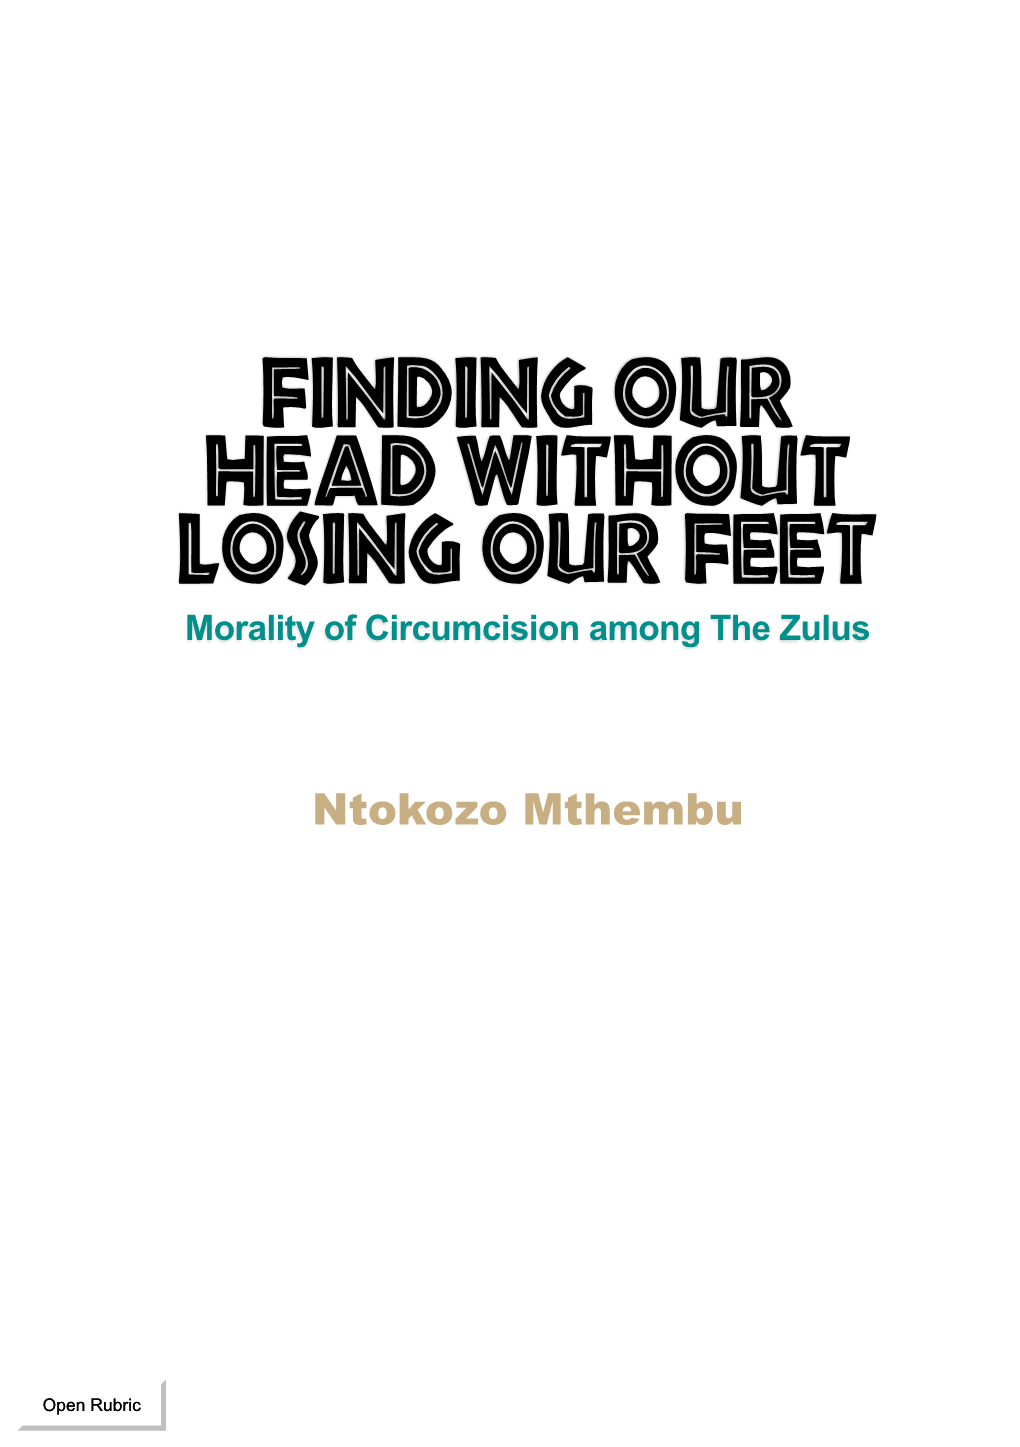 Finding Our Head Without Losing Our Feet Morality of Circumcision Among the Zulus